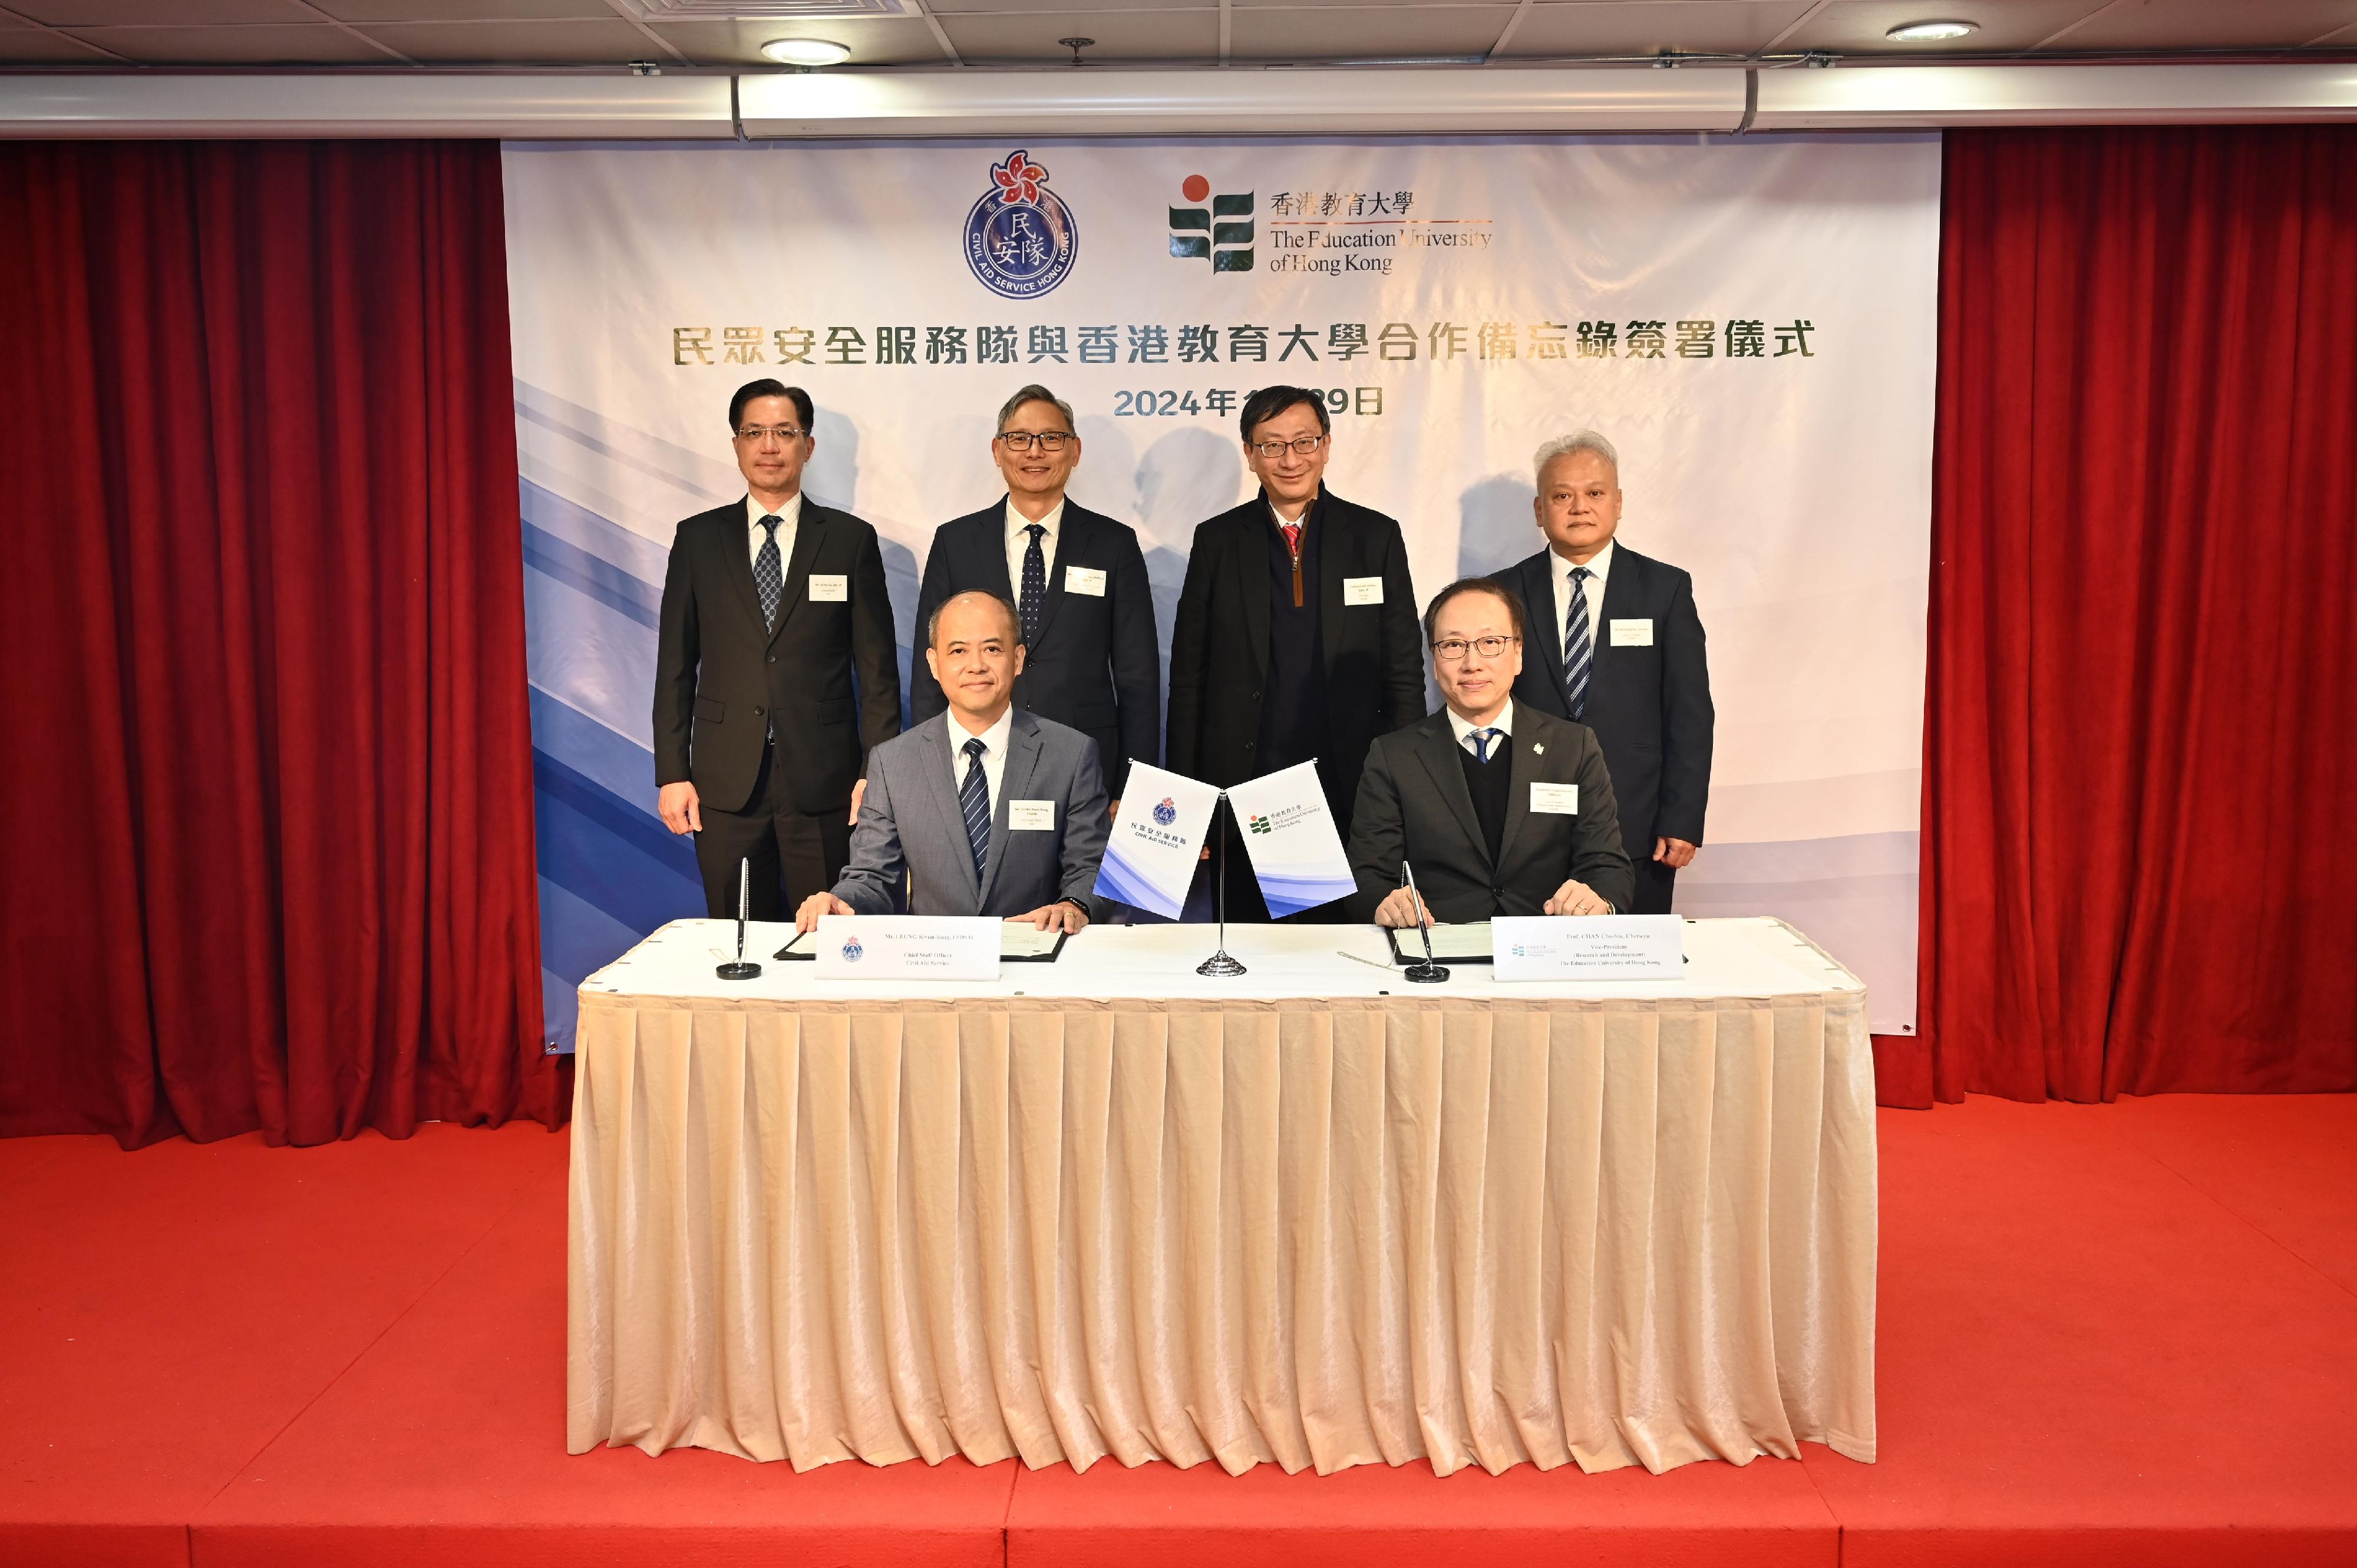 The Civil Aid Service (CAS) and the Education University of Hong Kong (EdUHK) signed a Memorandum of Understanding (MOU) today (January 29) to underpin a closer collaboration. Witnessed by the Under Secretary for Security, Mr Michael Cheuk (back row, second left); the Commissioner of the CAS, Mr Lo Yan-lai (back row, first left); the President of EdUHK, Professor John Lee (back row, second right); and the Dean of Students of EdUHK, Dr Sammy Hui (back row, first right), the MOU was signed by the Chief Staff Officer of the CAS, Mr Leung Kwun-hong (front row, left), and the Vice President (Research and Development) of EdUHK, Professor Chetwyn Chan (front row, right).